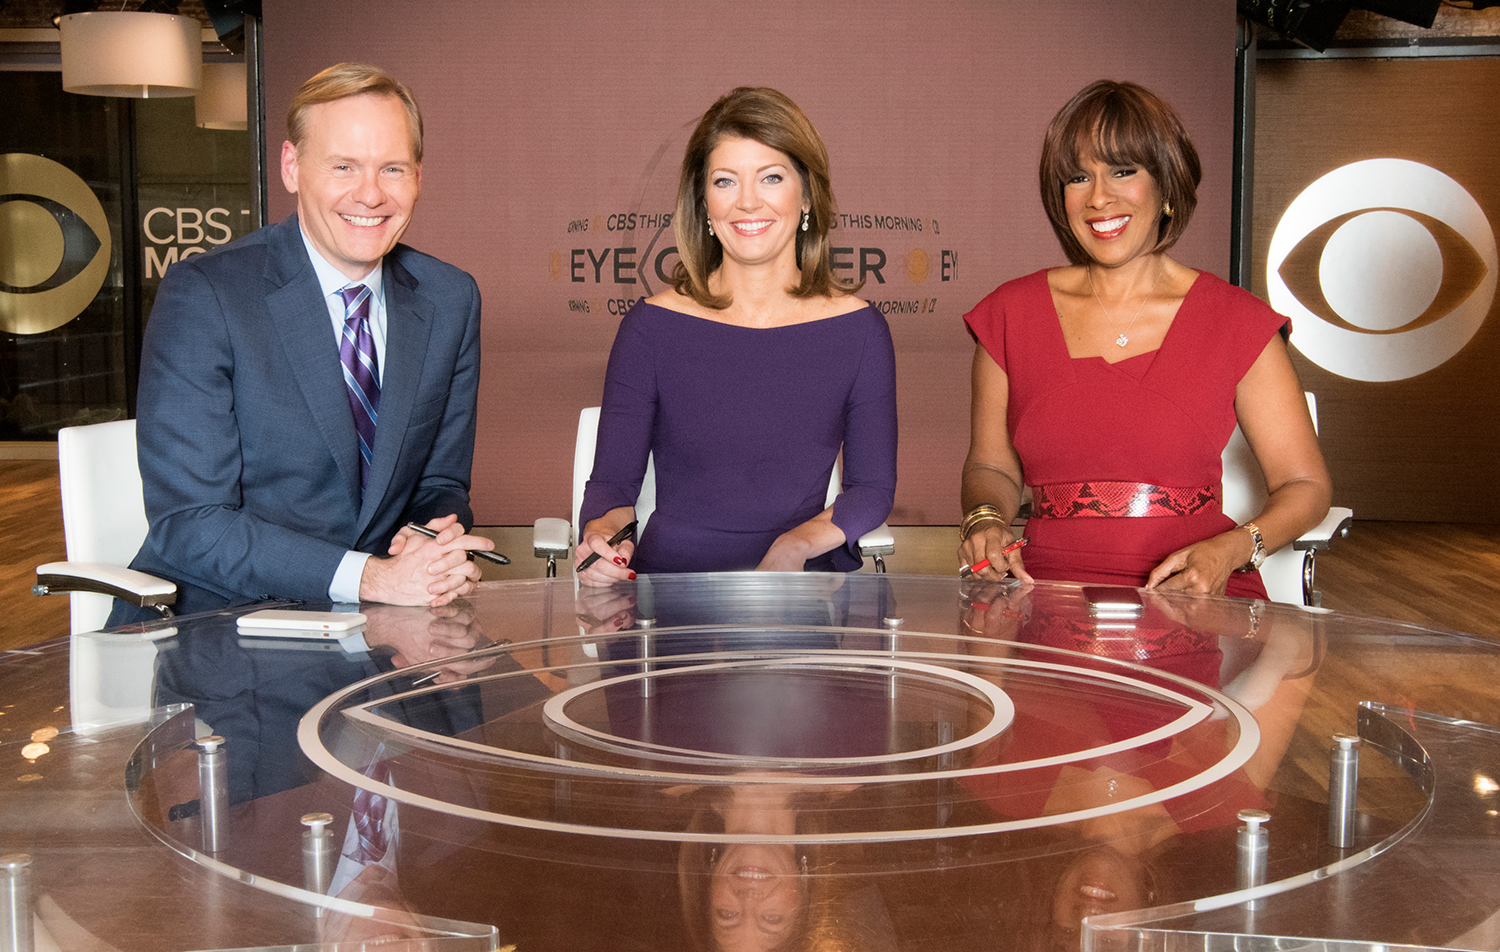 Norah O’Donnell, Gayle King and John Dickerson smile for the camera